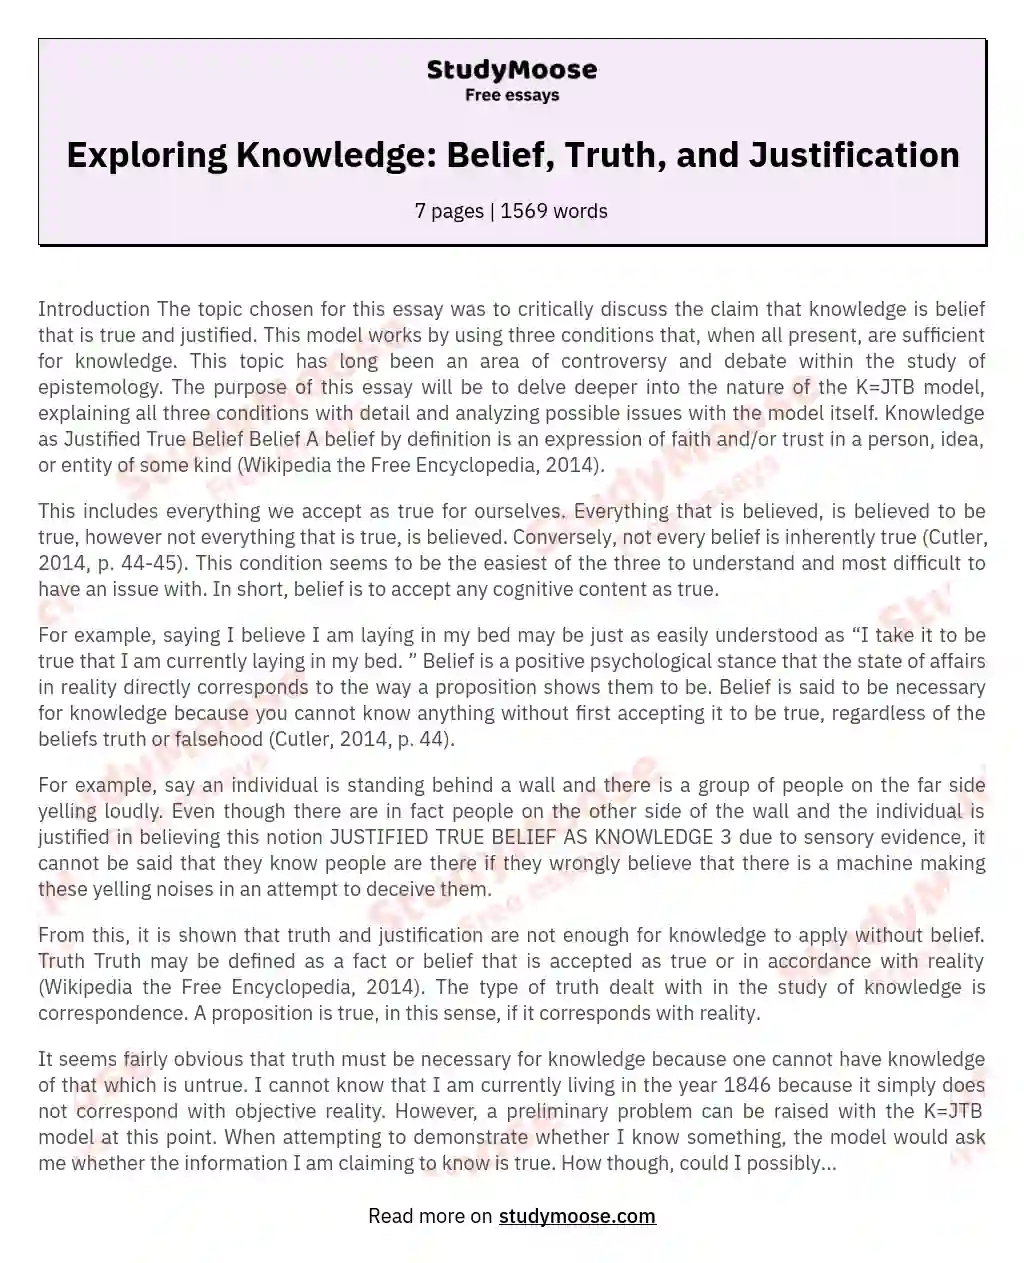 Exploring Knowledge: Belief, Truth, and Justification essay